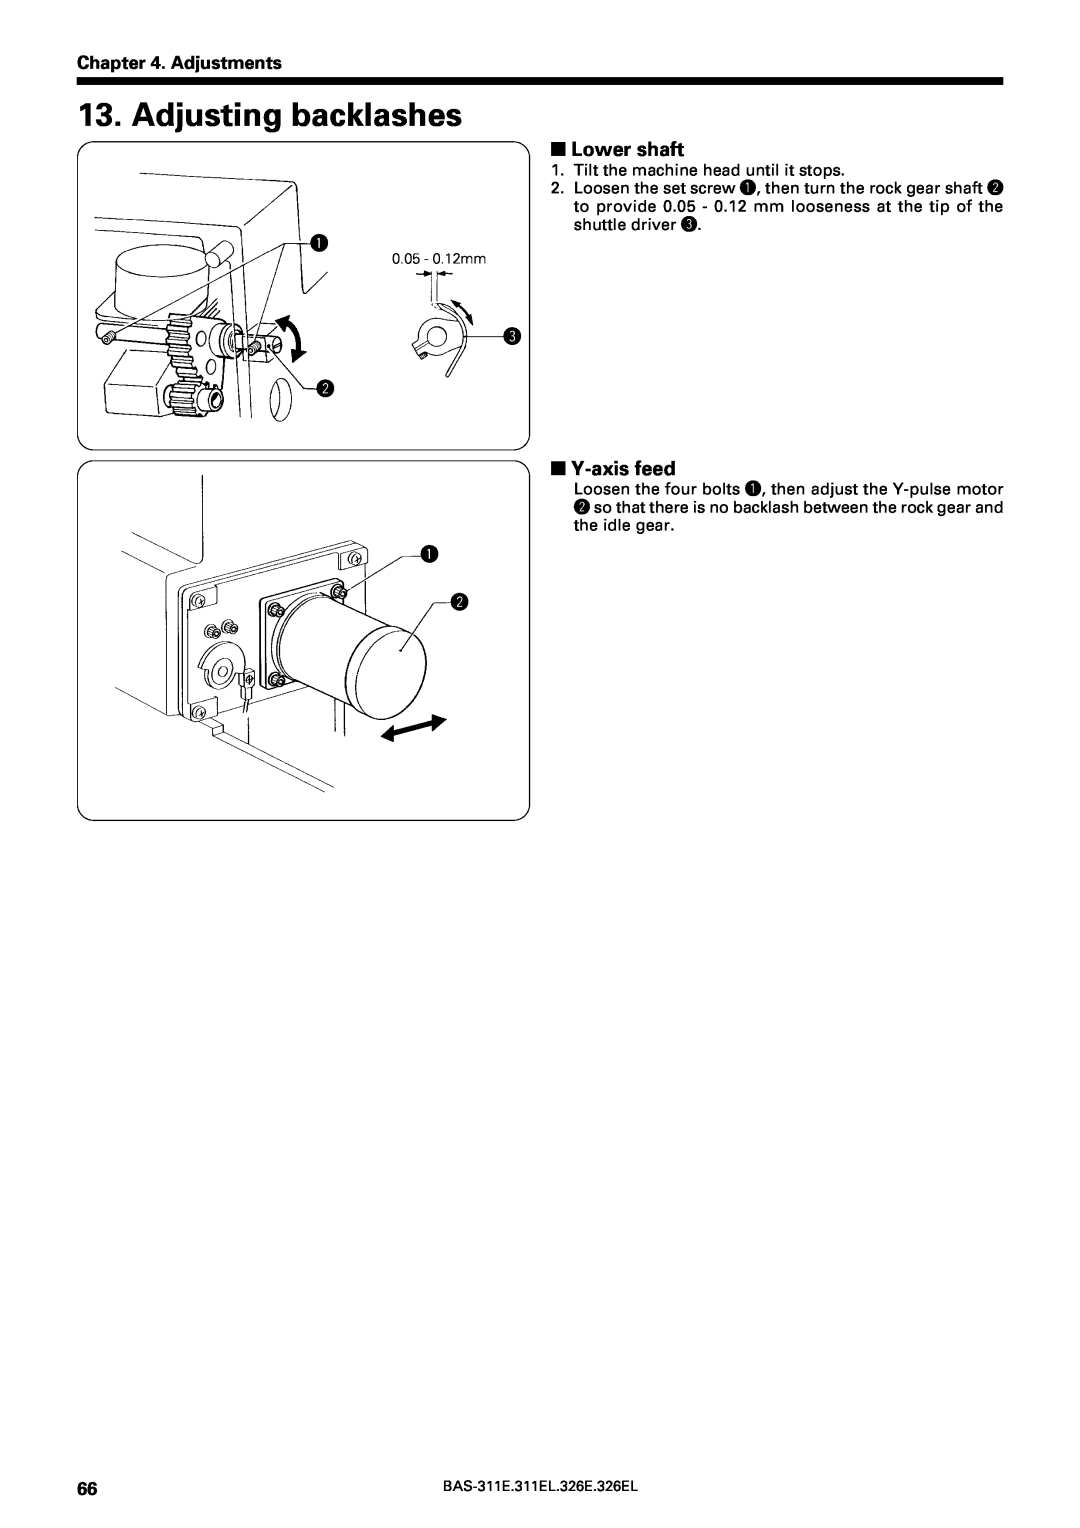 Brother BAS-311E service manual Adjusting backlashes, Lower shaft, Y-axis feed, Adjustments 